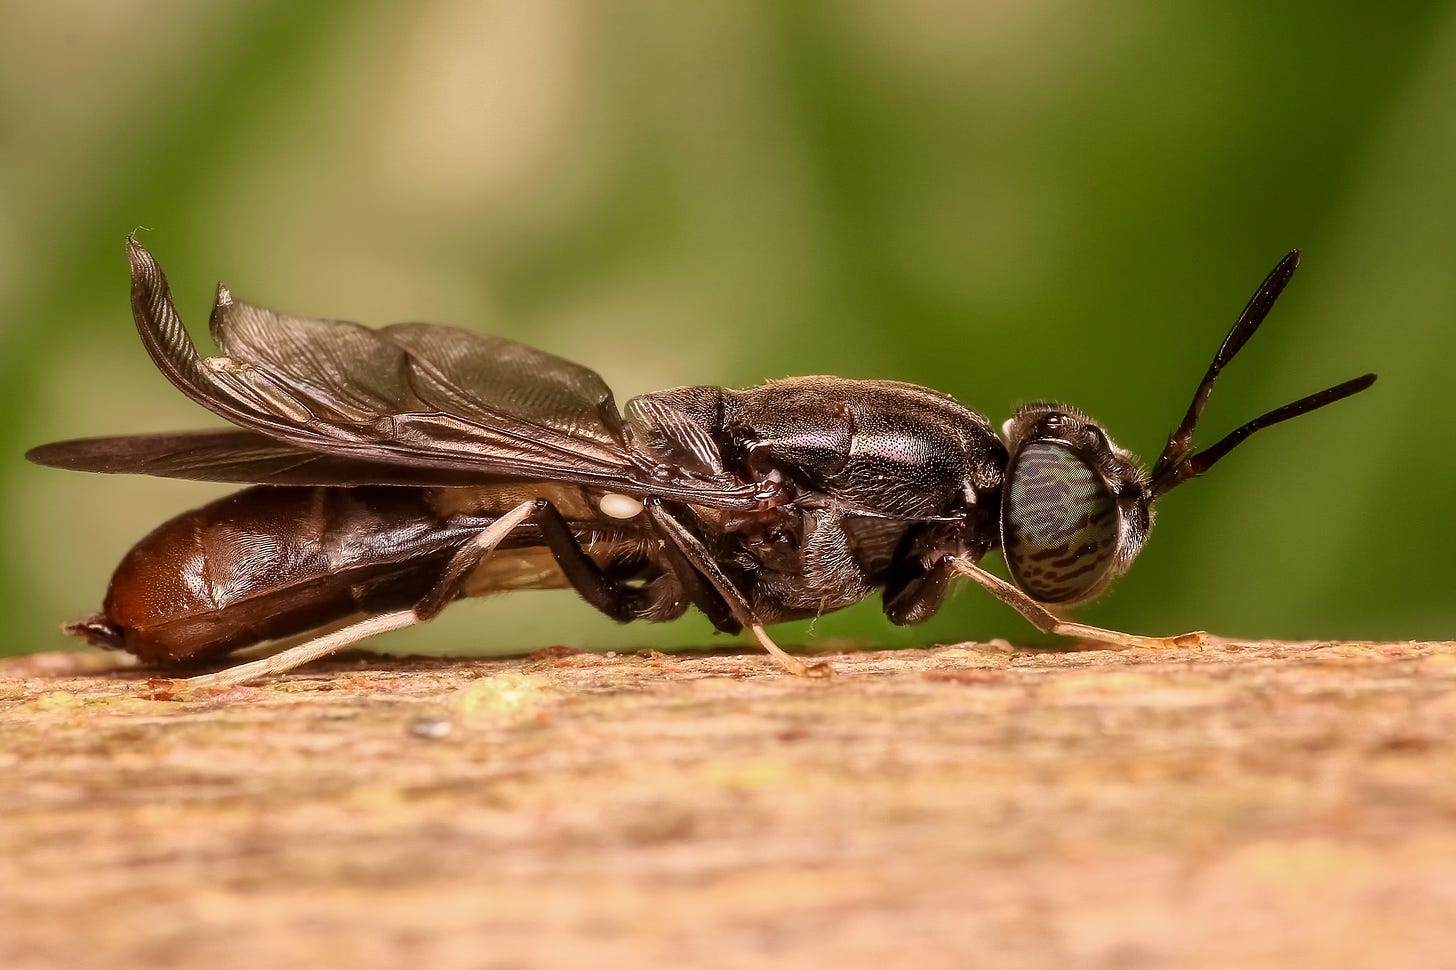 A Black Soldier Fly perched on a branch.